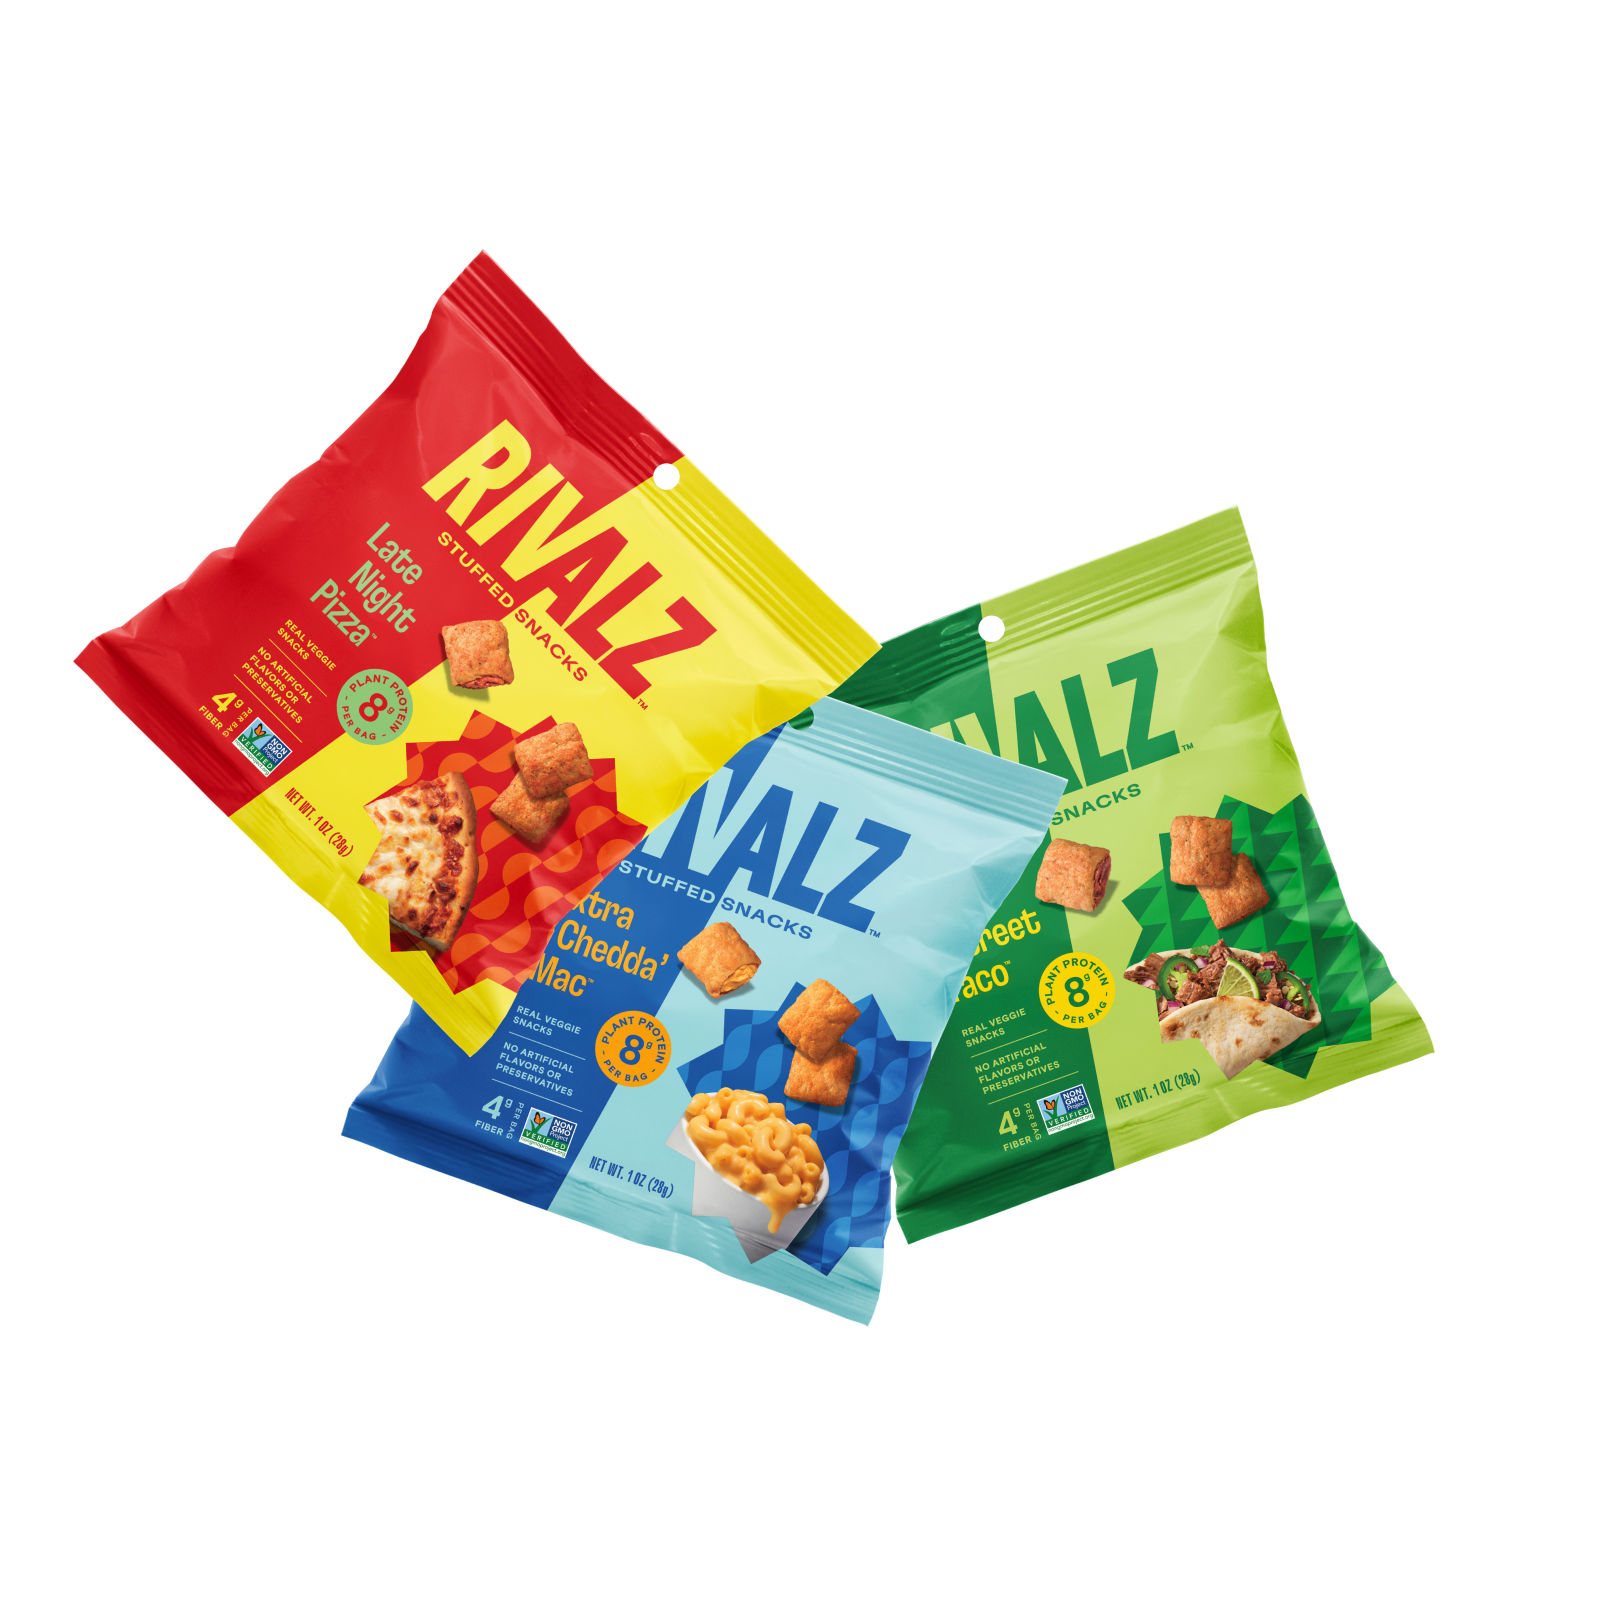 1oz variety pack bags of Spicy Street Taco, Late Night Pizza and Extra Chedda Mac plant-based snacks